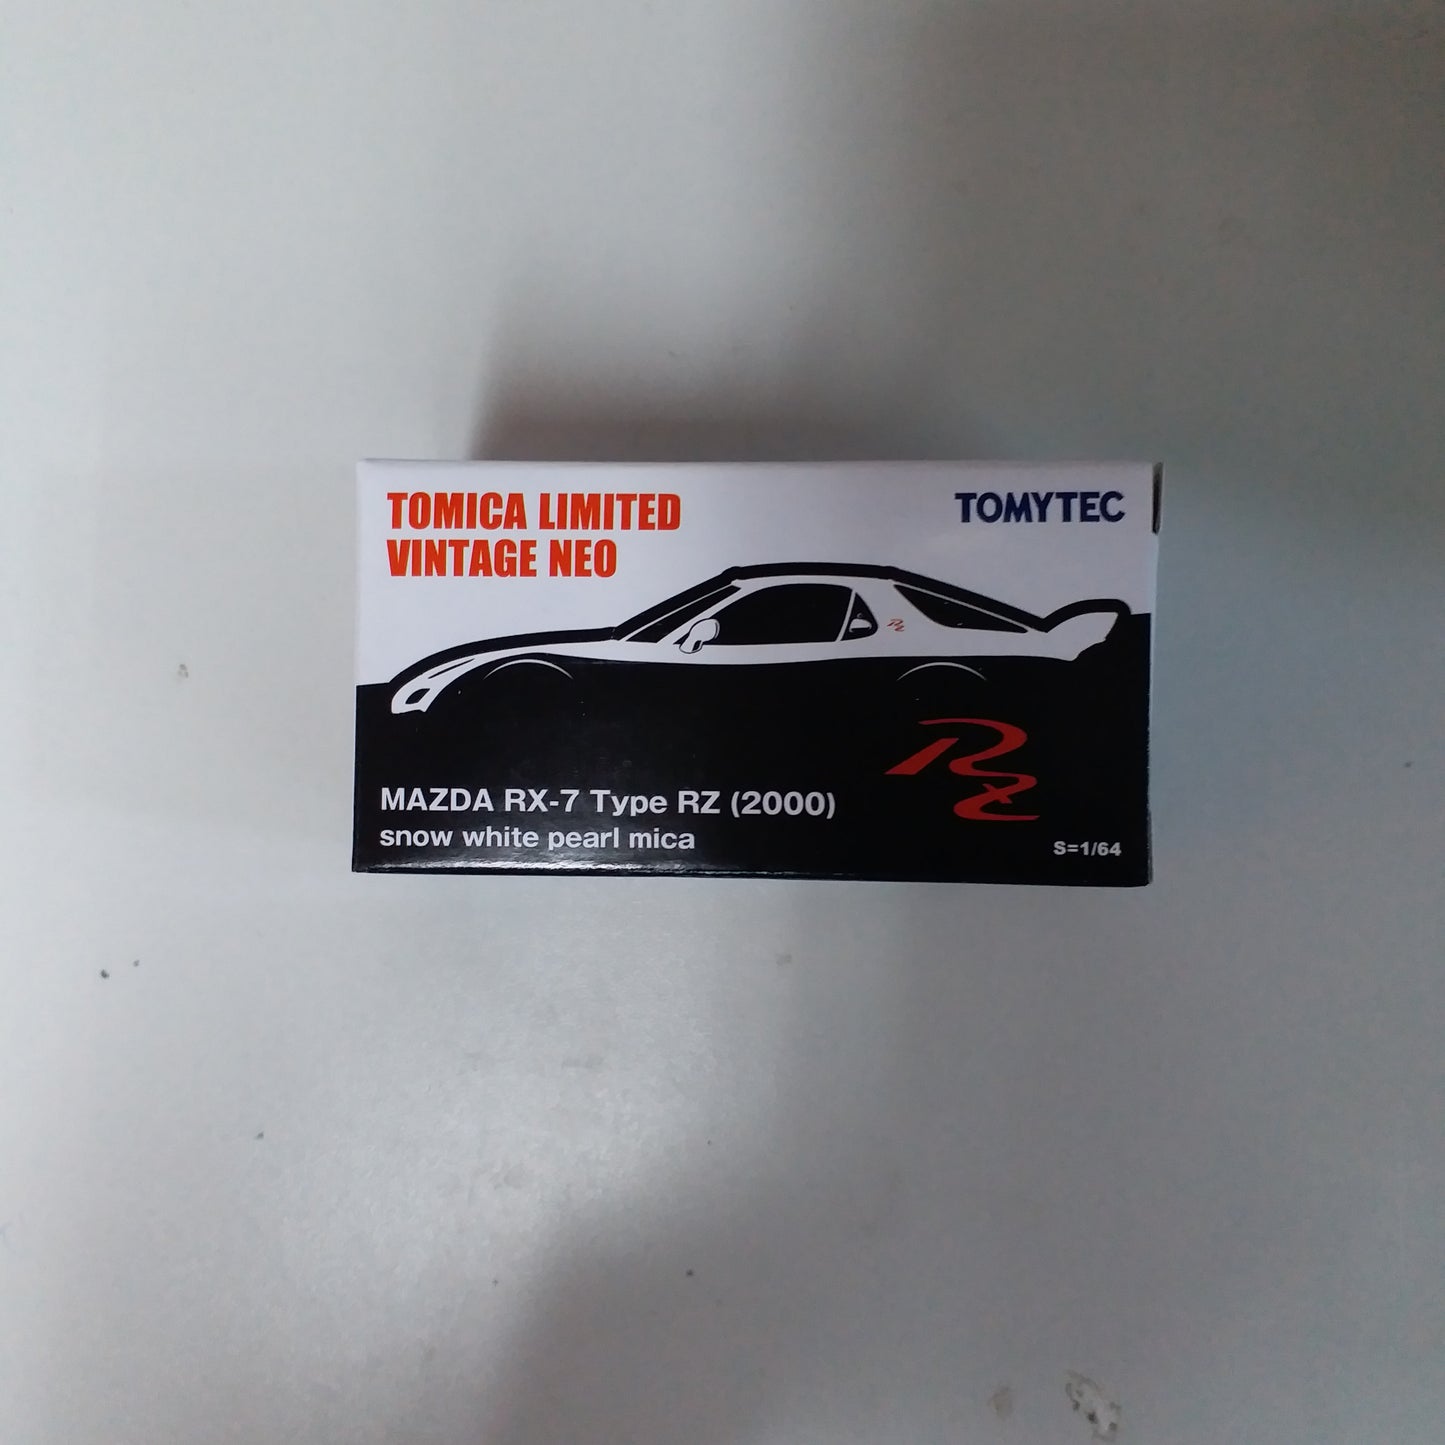 Tomica Limited Vintage Neo LV-N Hong Kong Exclusive Mazda RX-7 Type RZ White 2000 model